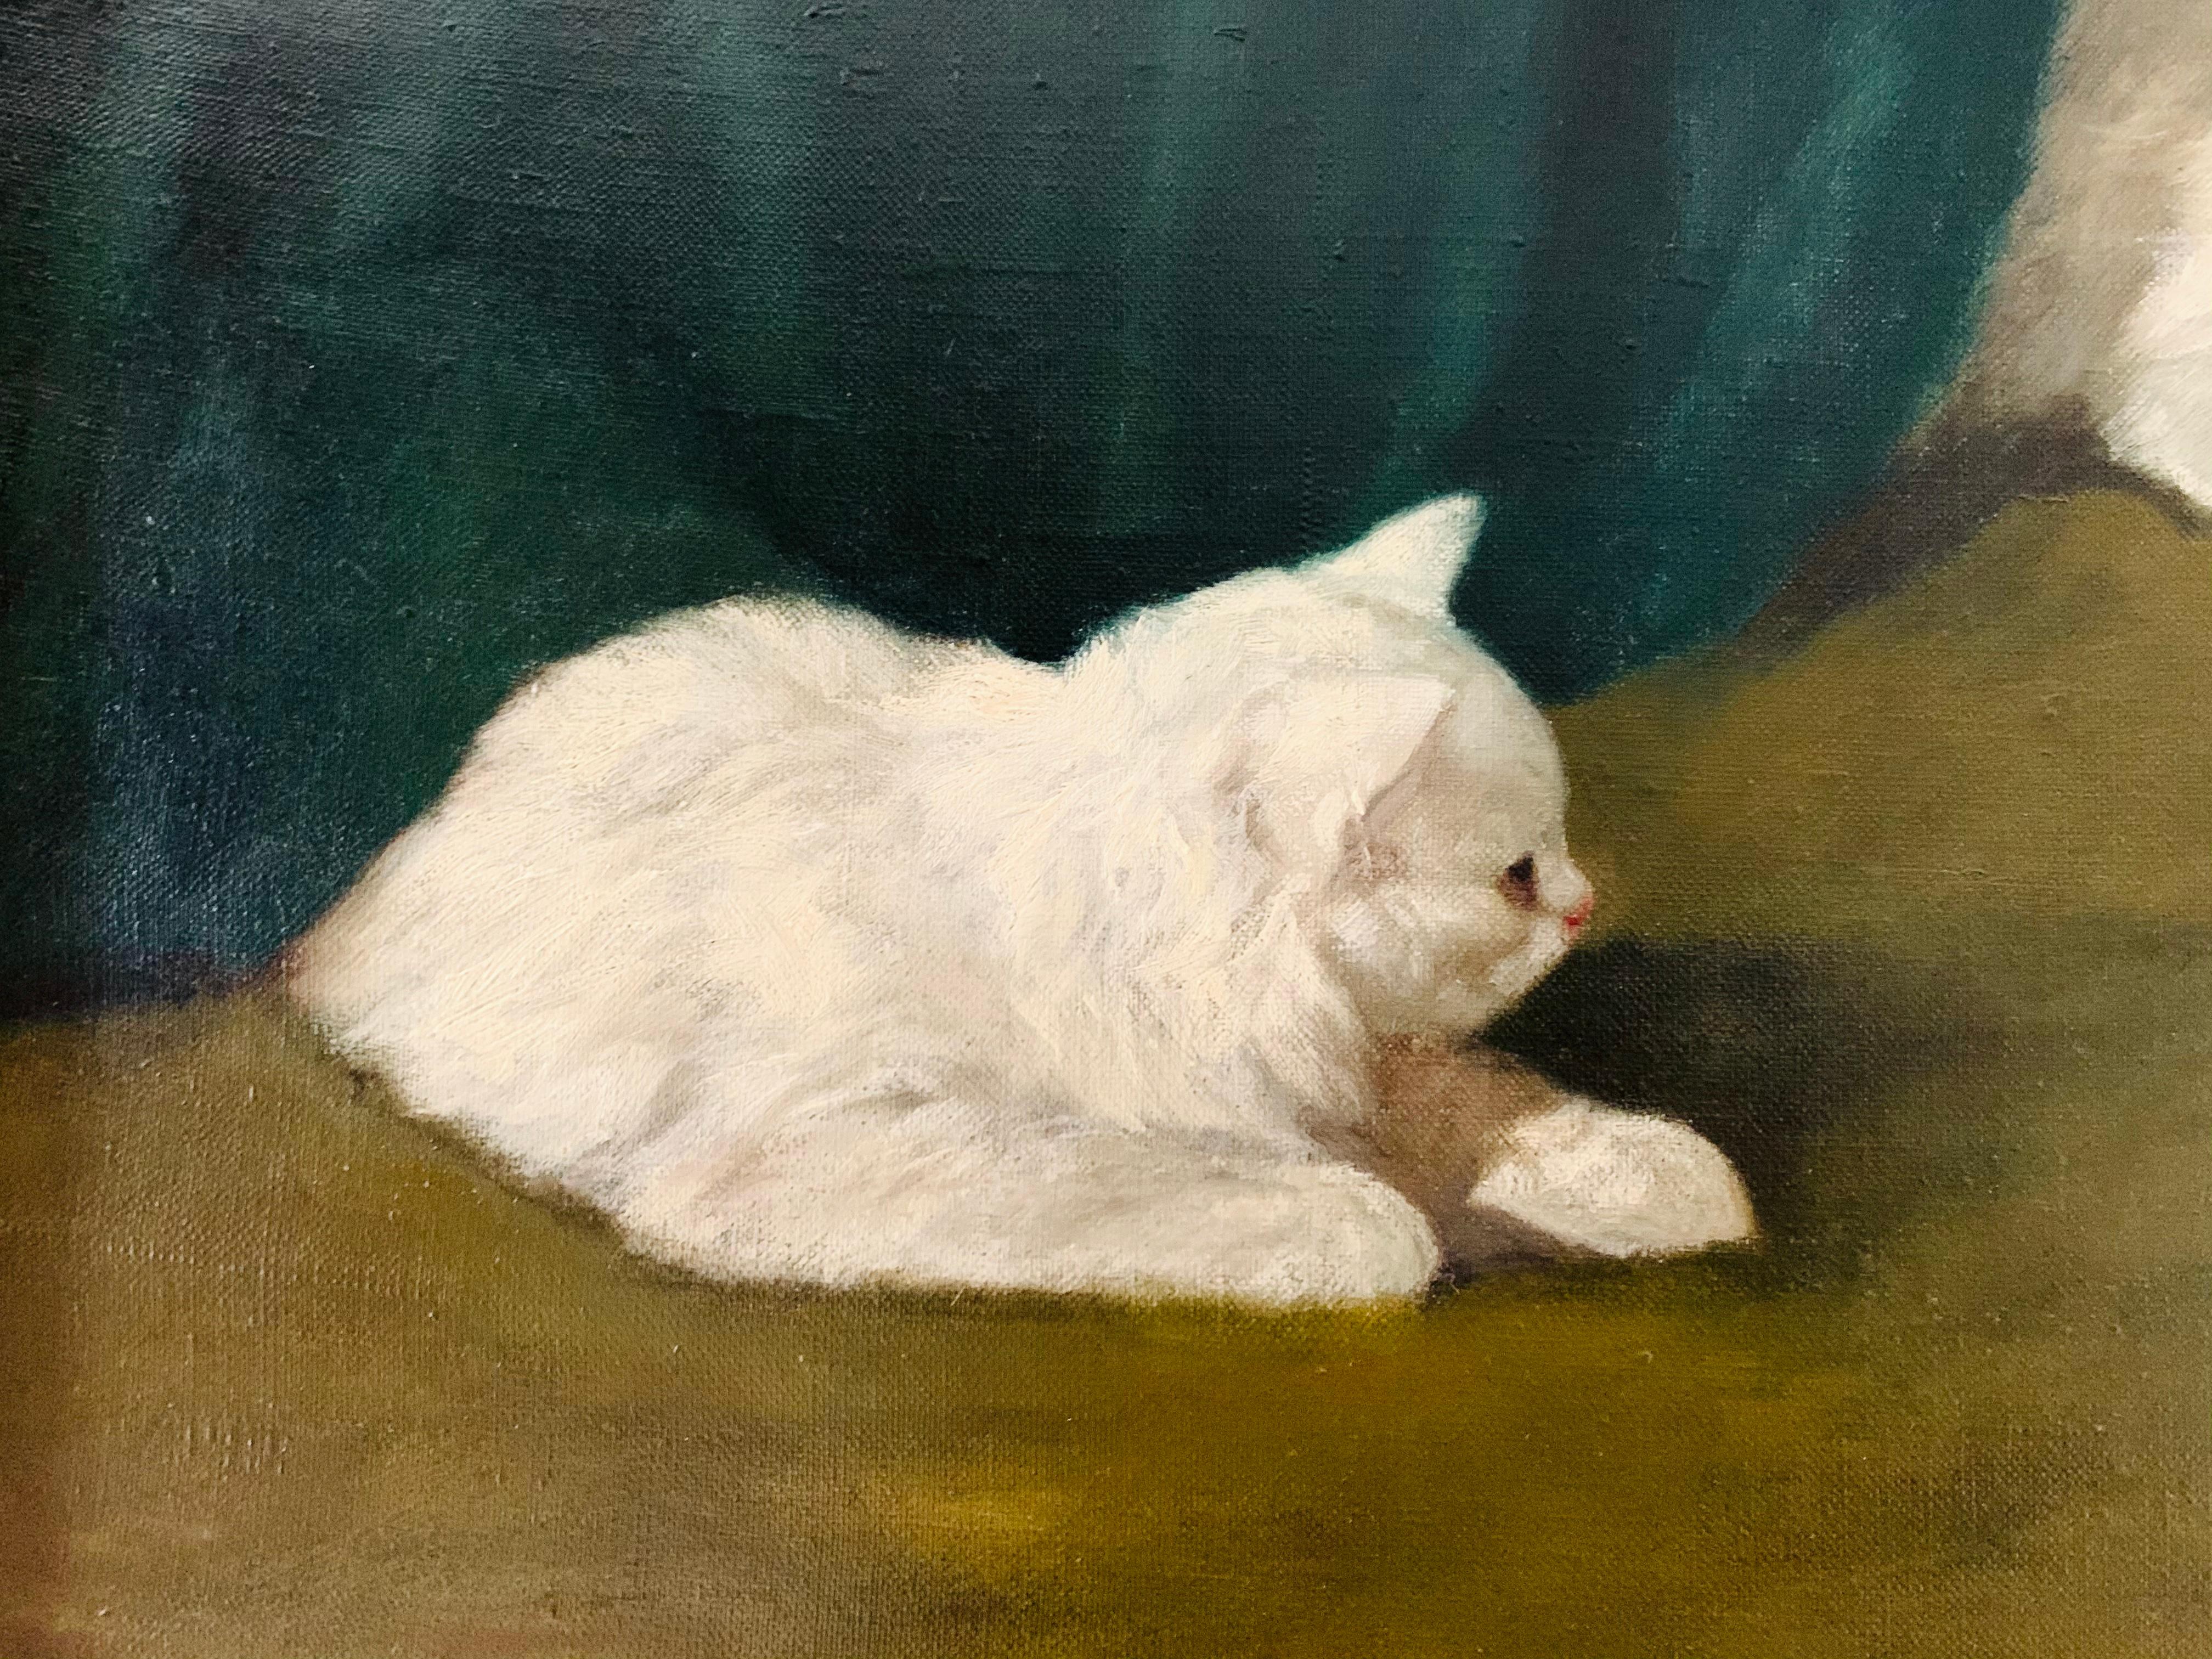 Two Cats, by Arthur Heyer 

Oil on canvas
21.5 x 27 inches

Arthur Heyer was born in Haarhausen. He studied at the college of applied arts in Berlin. In 1896 he went into exile in Rakospalota, near Budapest and eventually settled there permanently.